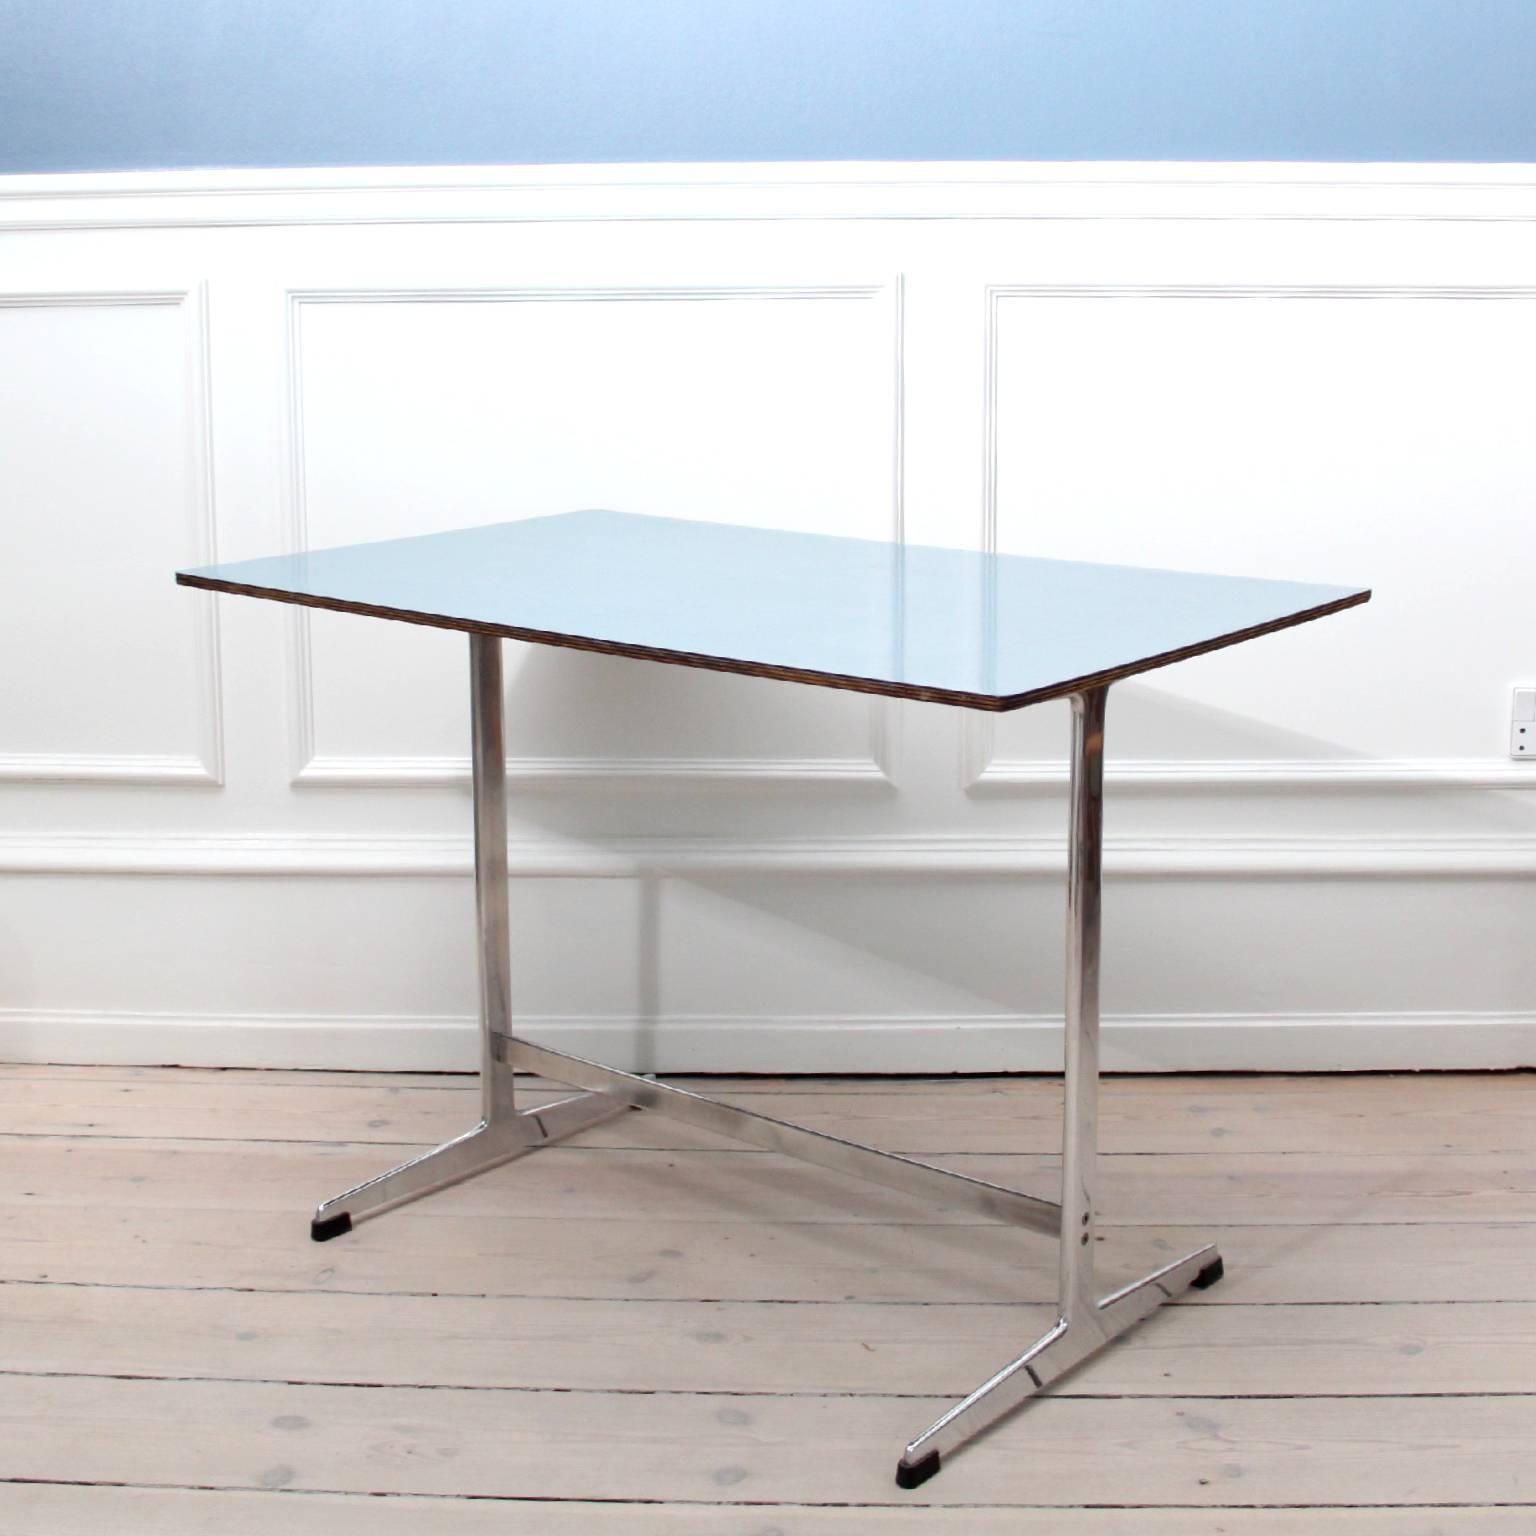 ARNE JACOBSEN & FRITZ HANSEN - MID-CENTURY MODERN DESIGN

An original Arne Jacobsen cocktail table with top of blue Formica and polished aluminum Shaker legs. 

Designed 1958 for the Iconic SAS Royal Hotel in Copenhagen.

Manufactured by Fritz